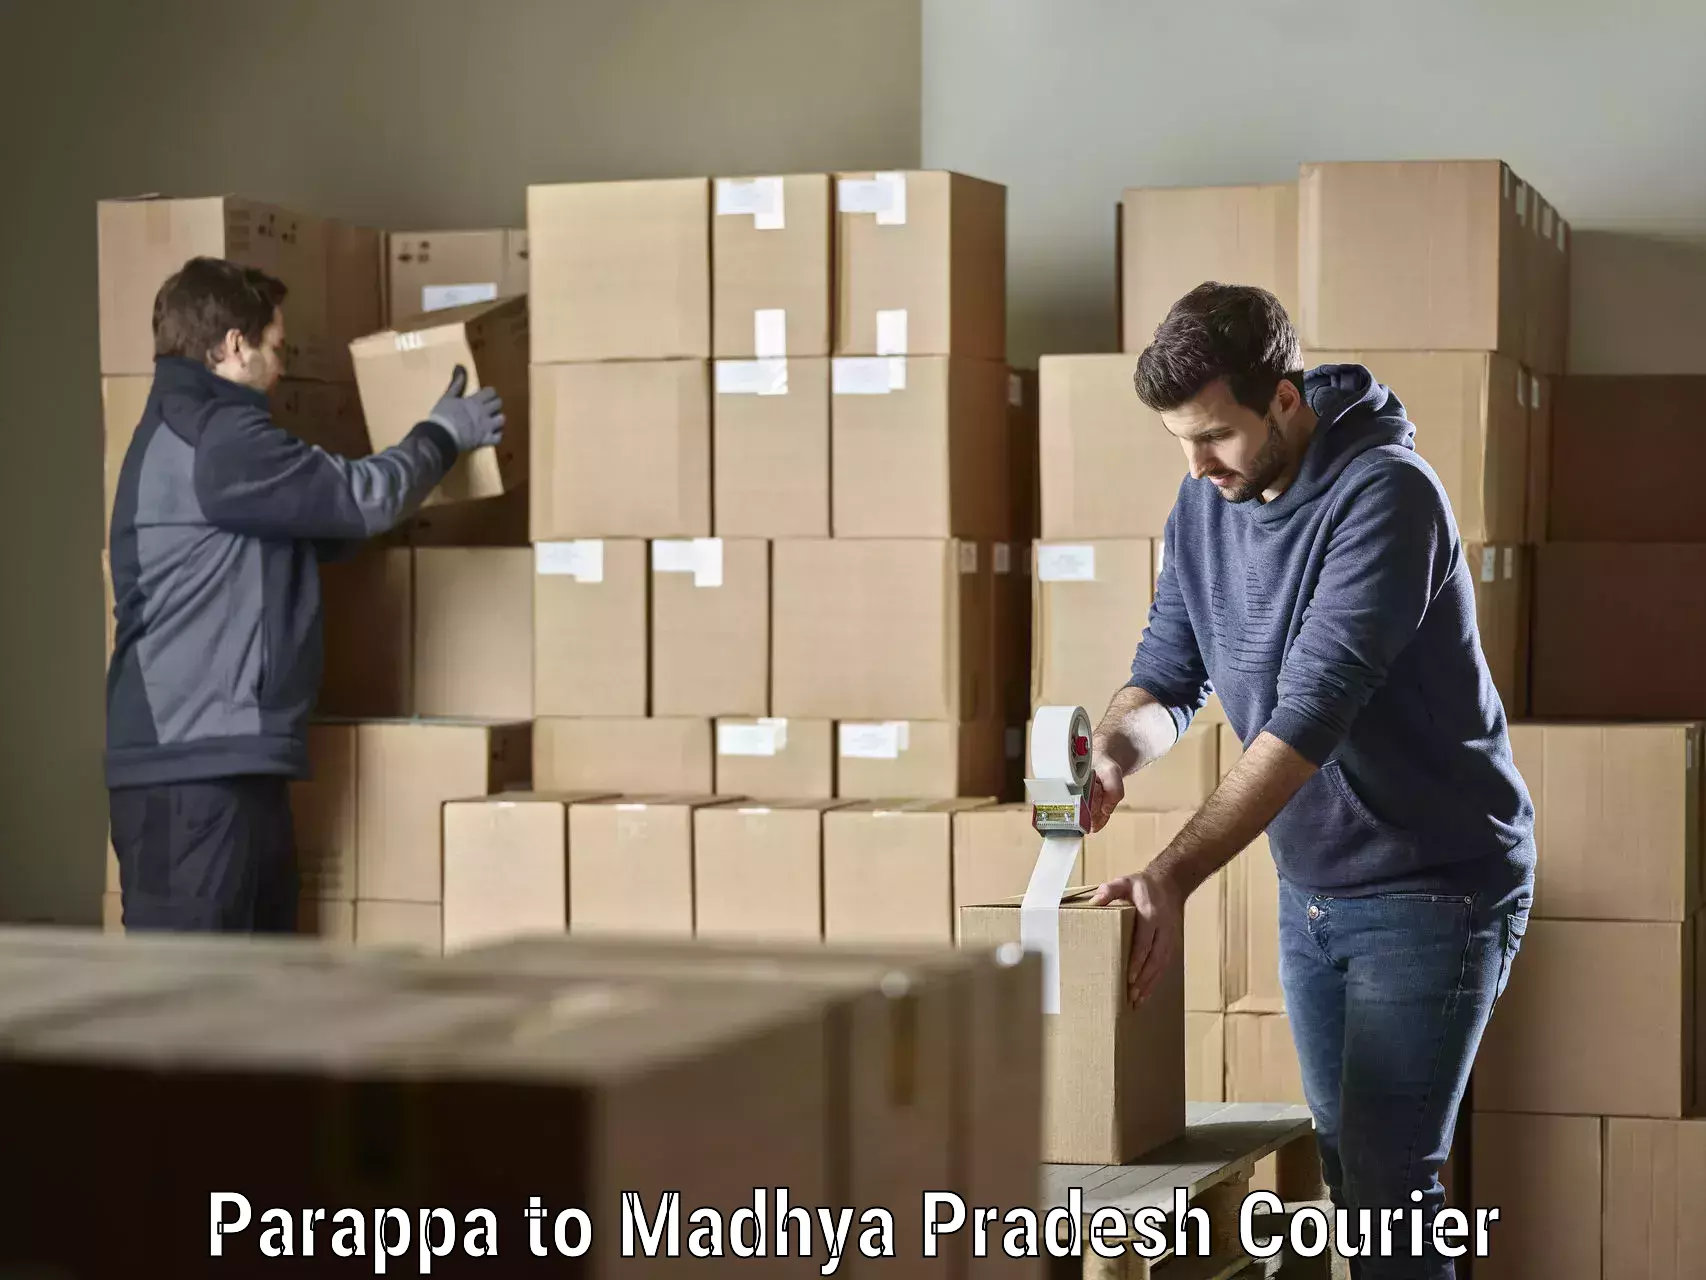 Full-service courier options Parappa to Madhya Pradesh